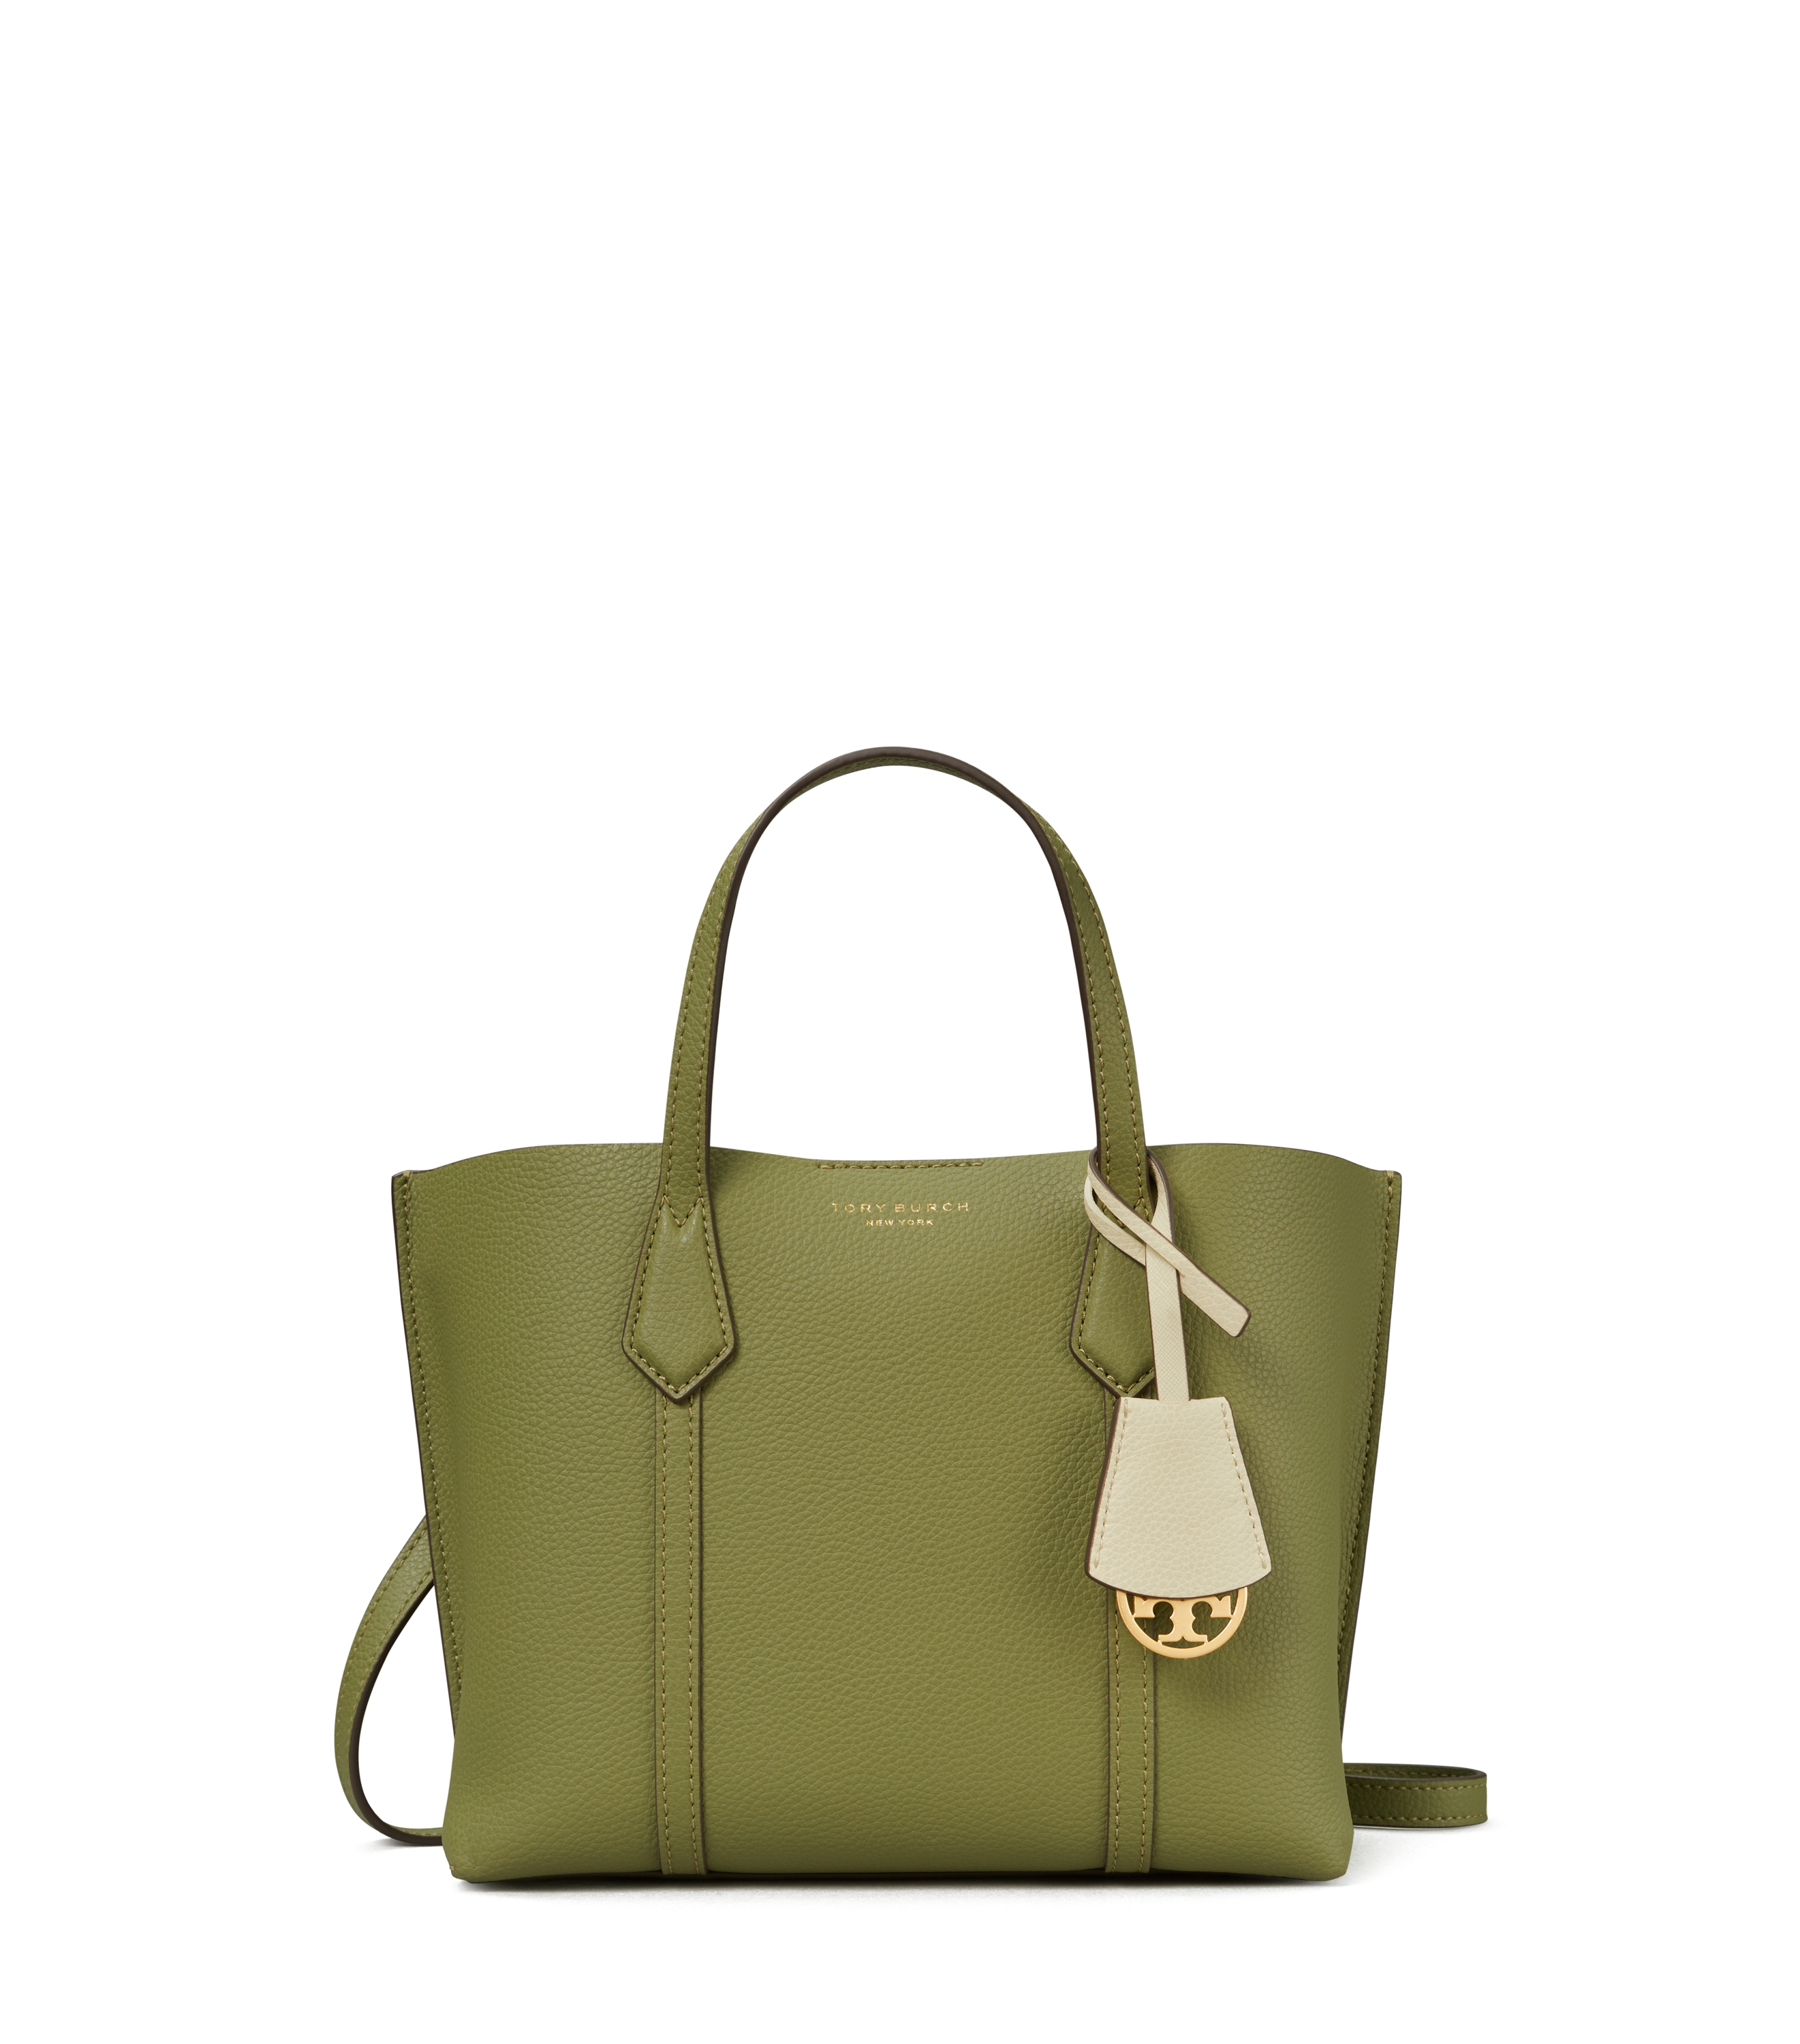 PERRY SMALL TRIPLE-C.TOTE Handtasche